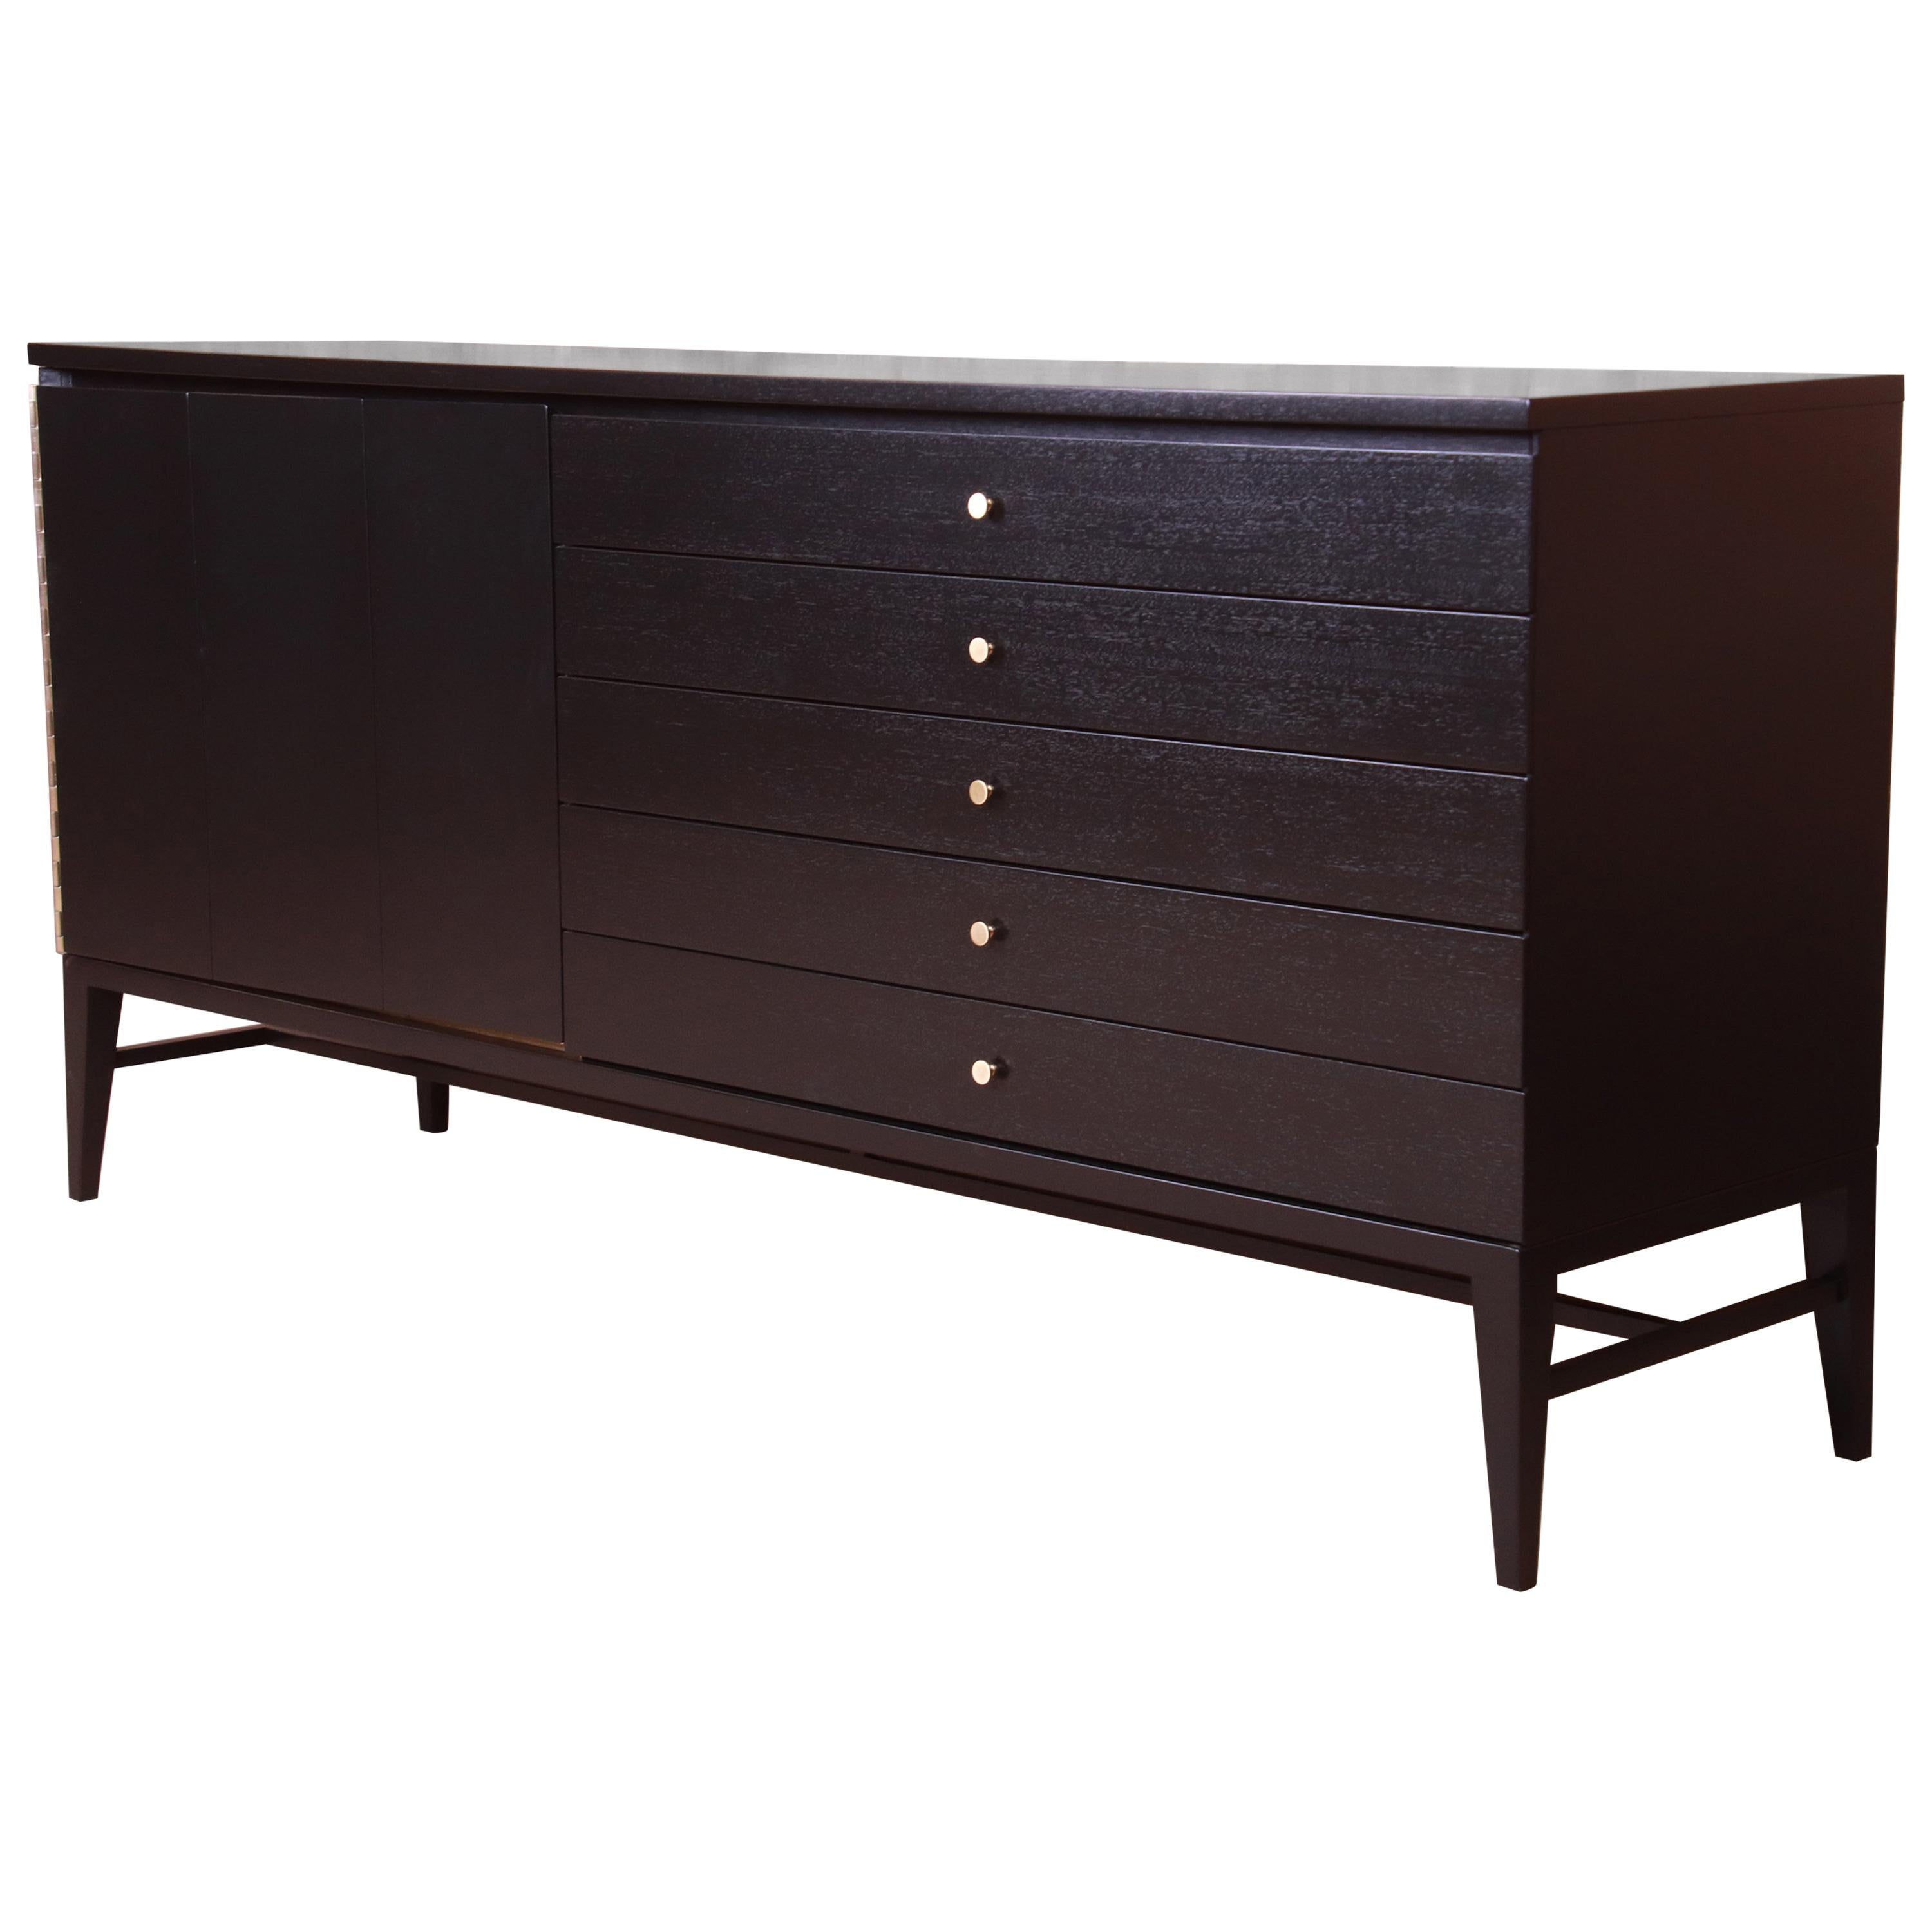 Paul McCobb for Calvin Irwin Collection Black Lacquered Credenza, Refinished